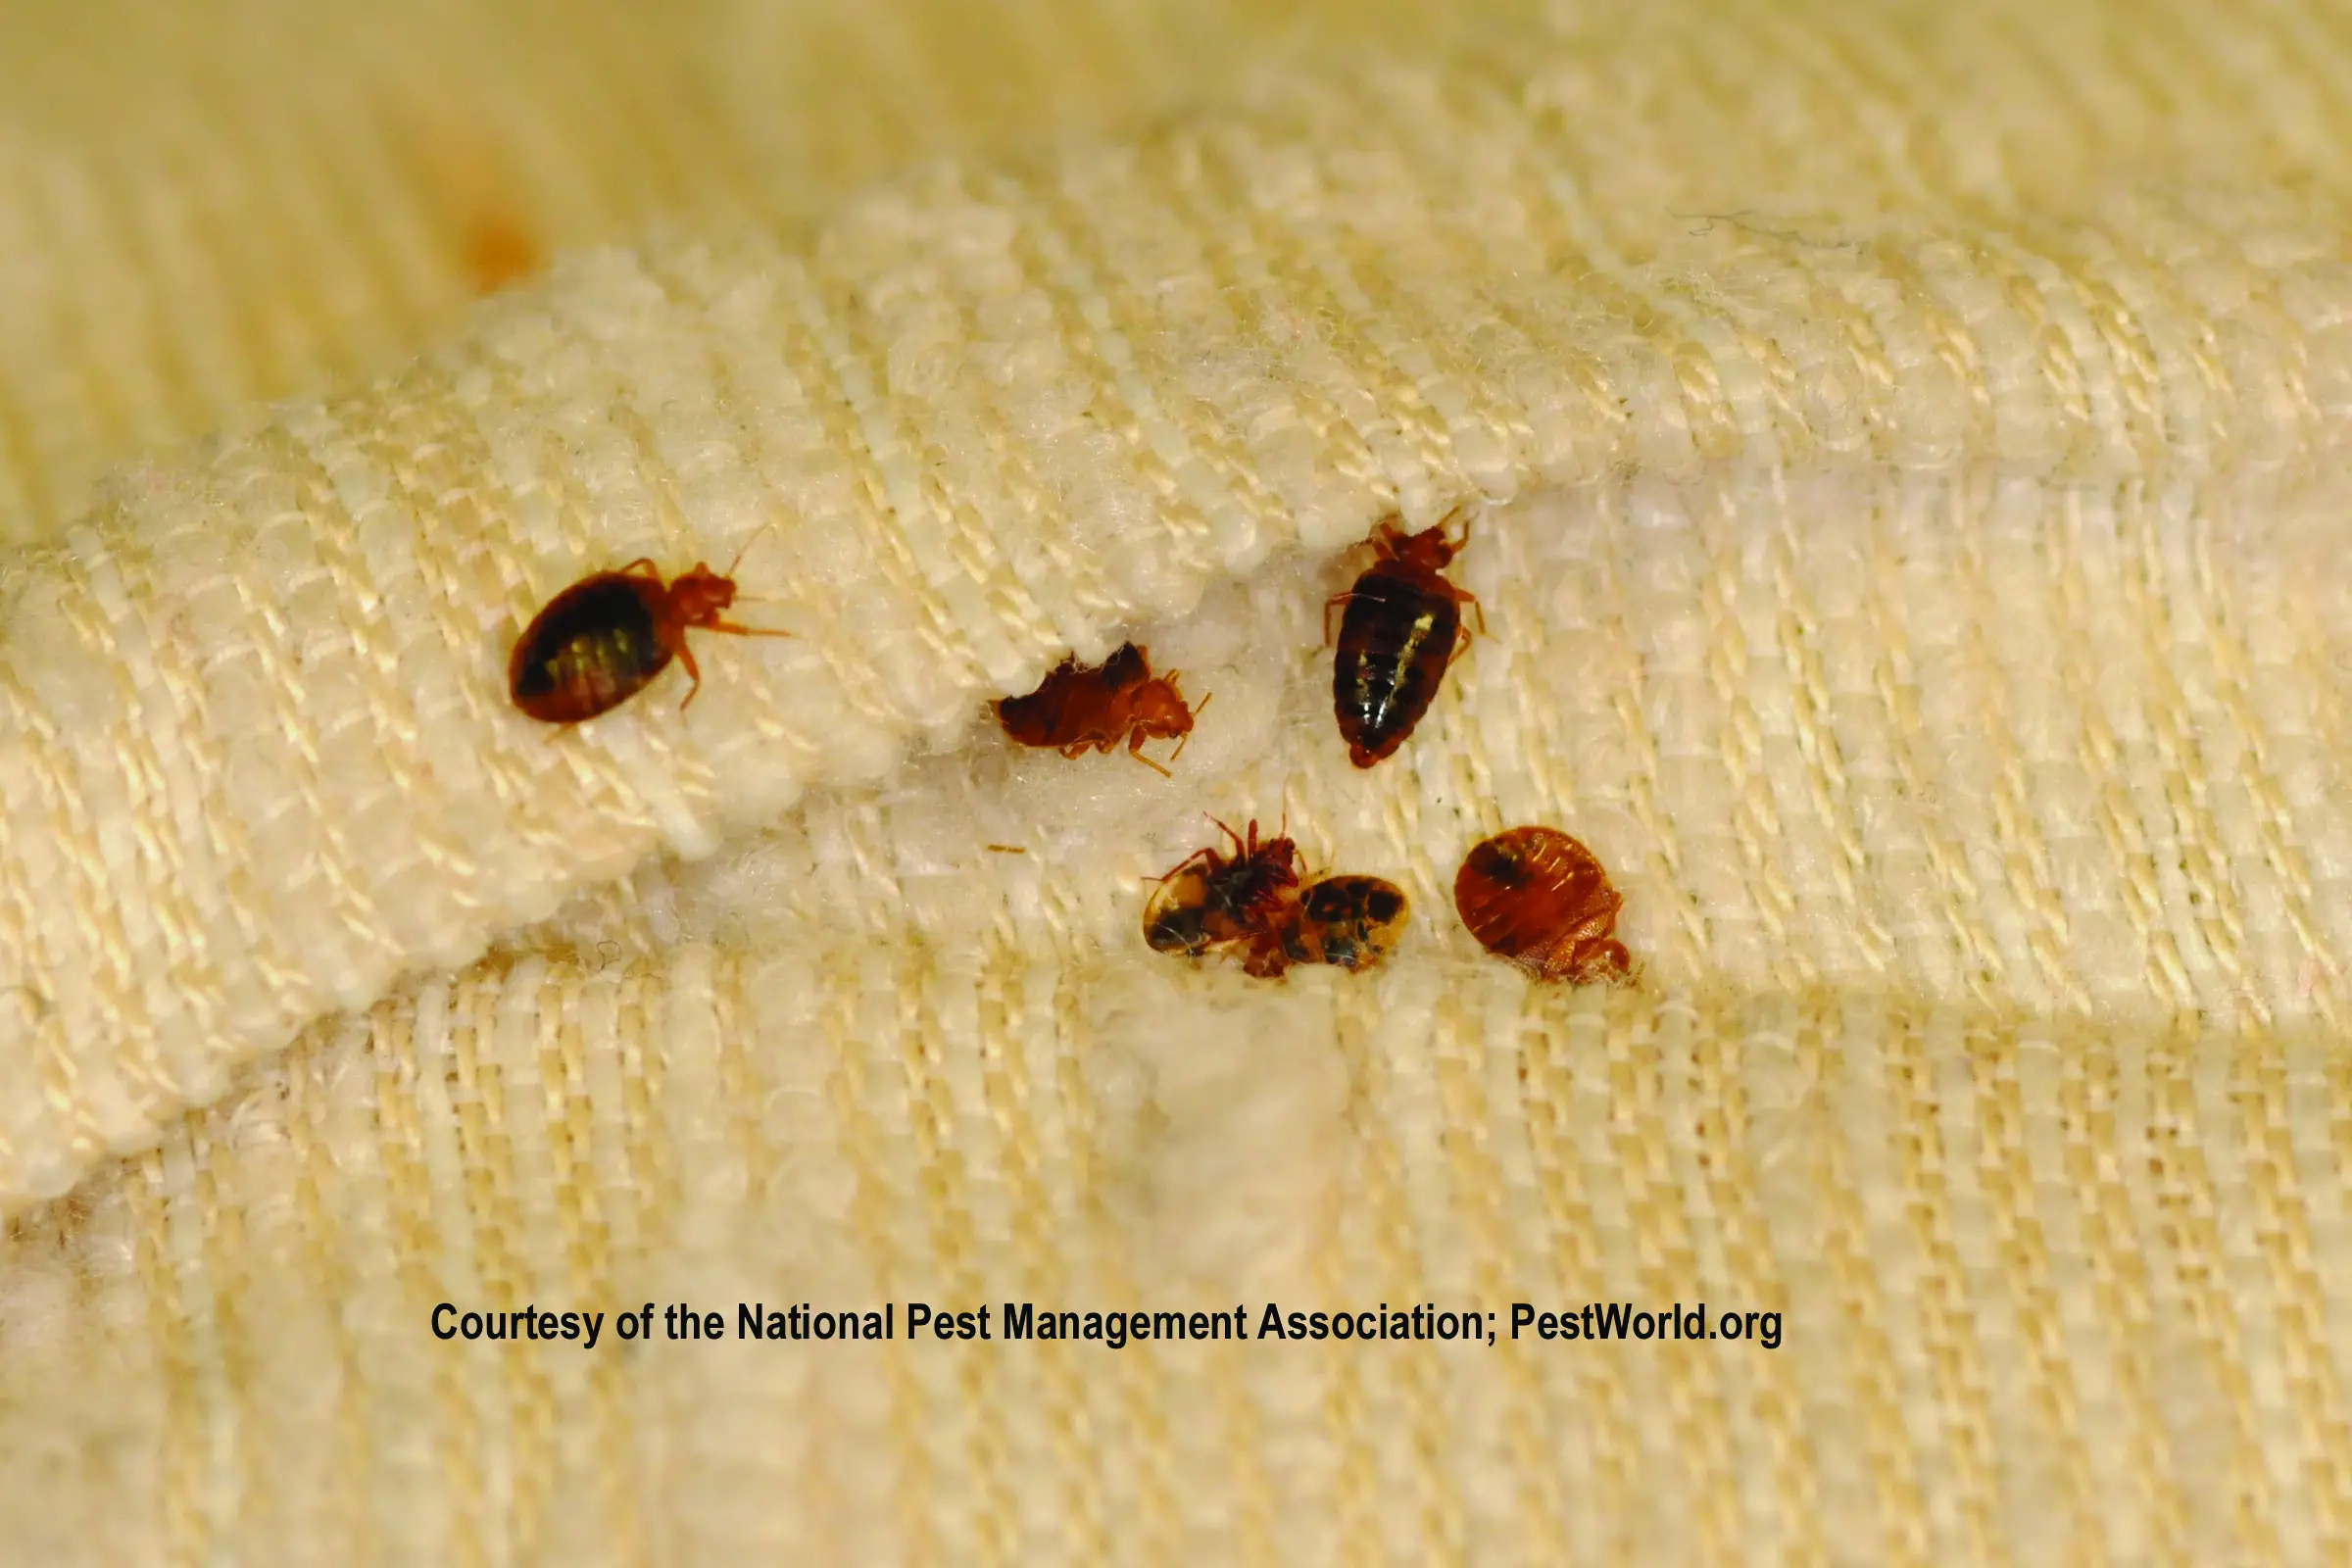 How Long Do Bed Bugs Live Without Feeding?